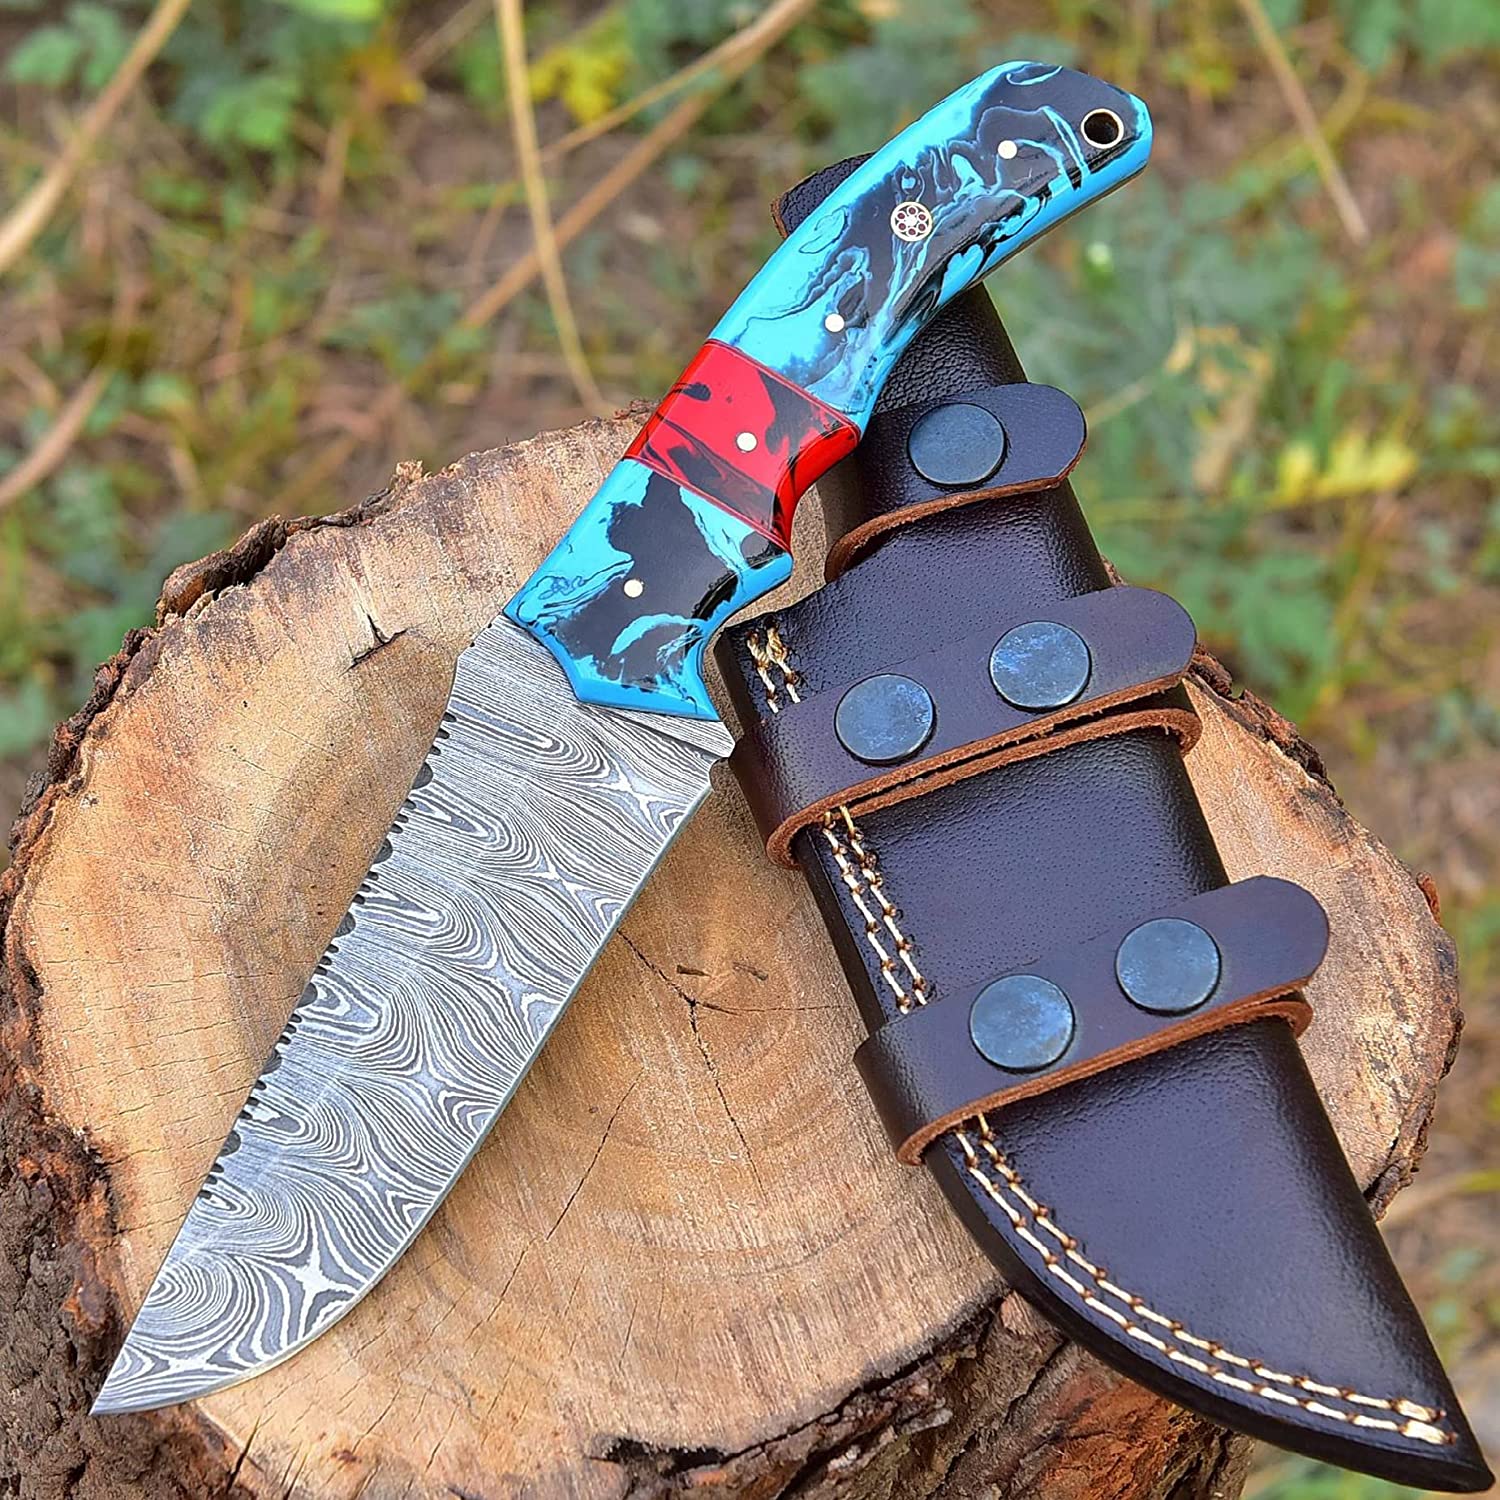 BG Knives 10 Inches Handmade Damascus Steel Knife With Leather Sheath Full Tang Hunting Skinner Fixed Blade knife Resin Handle HR-128